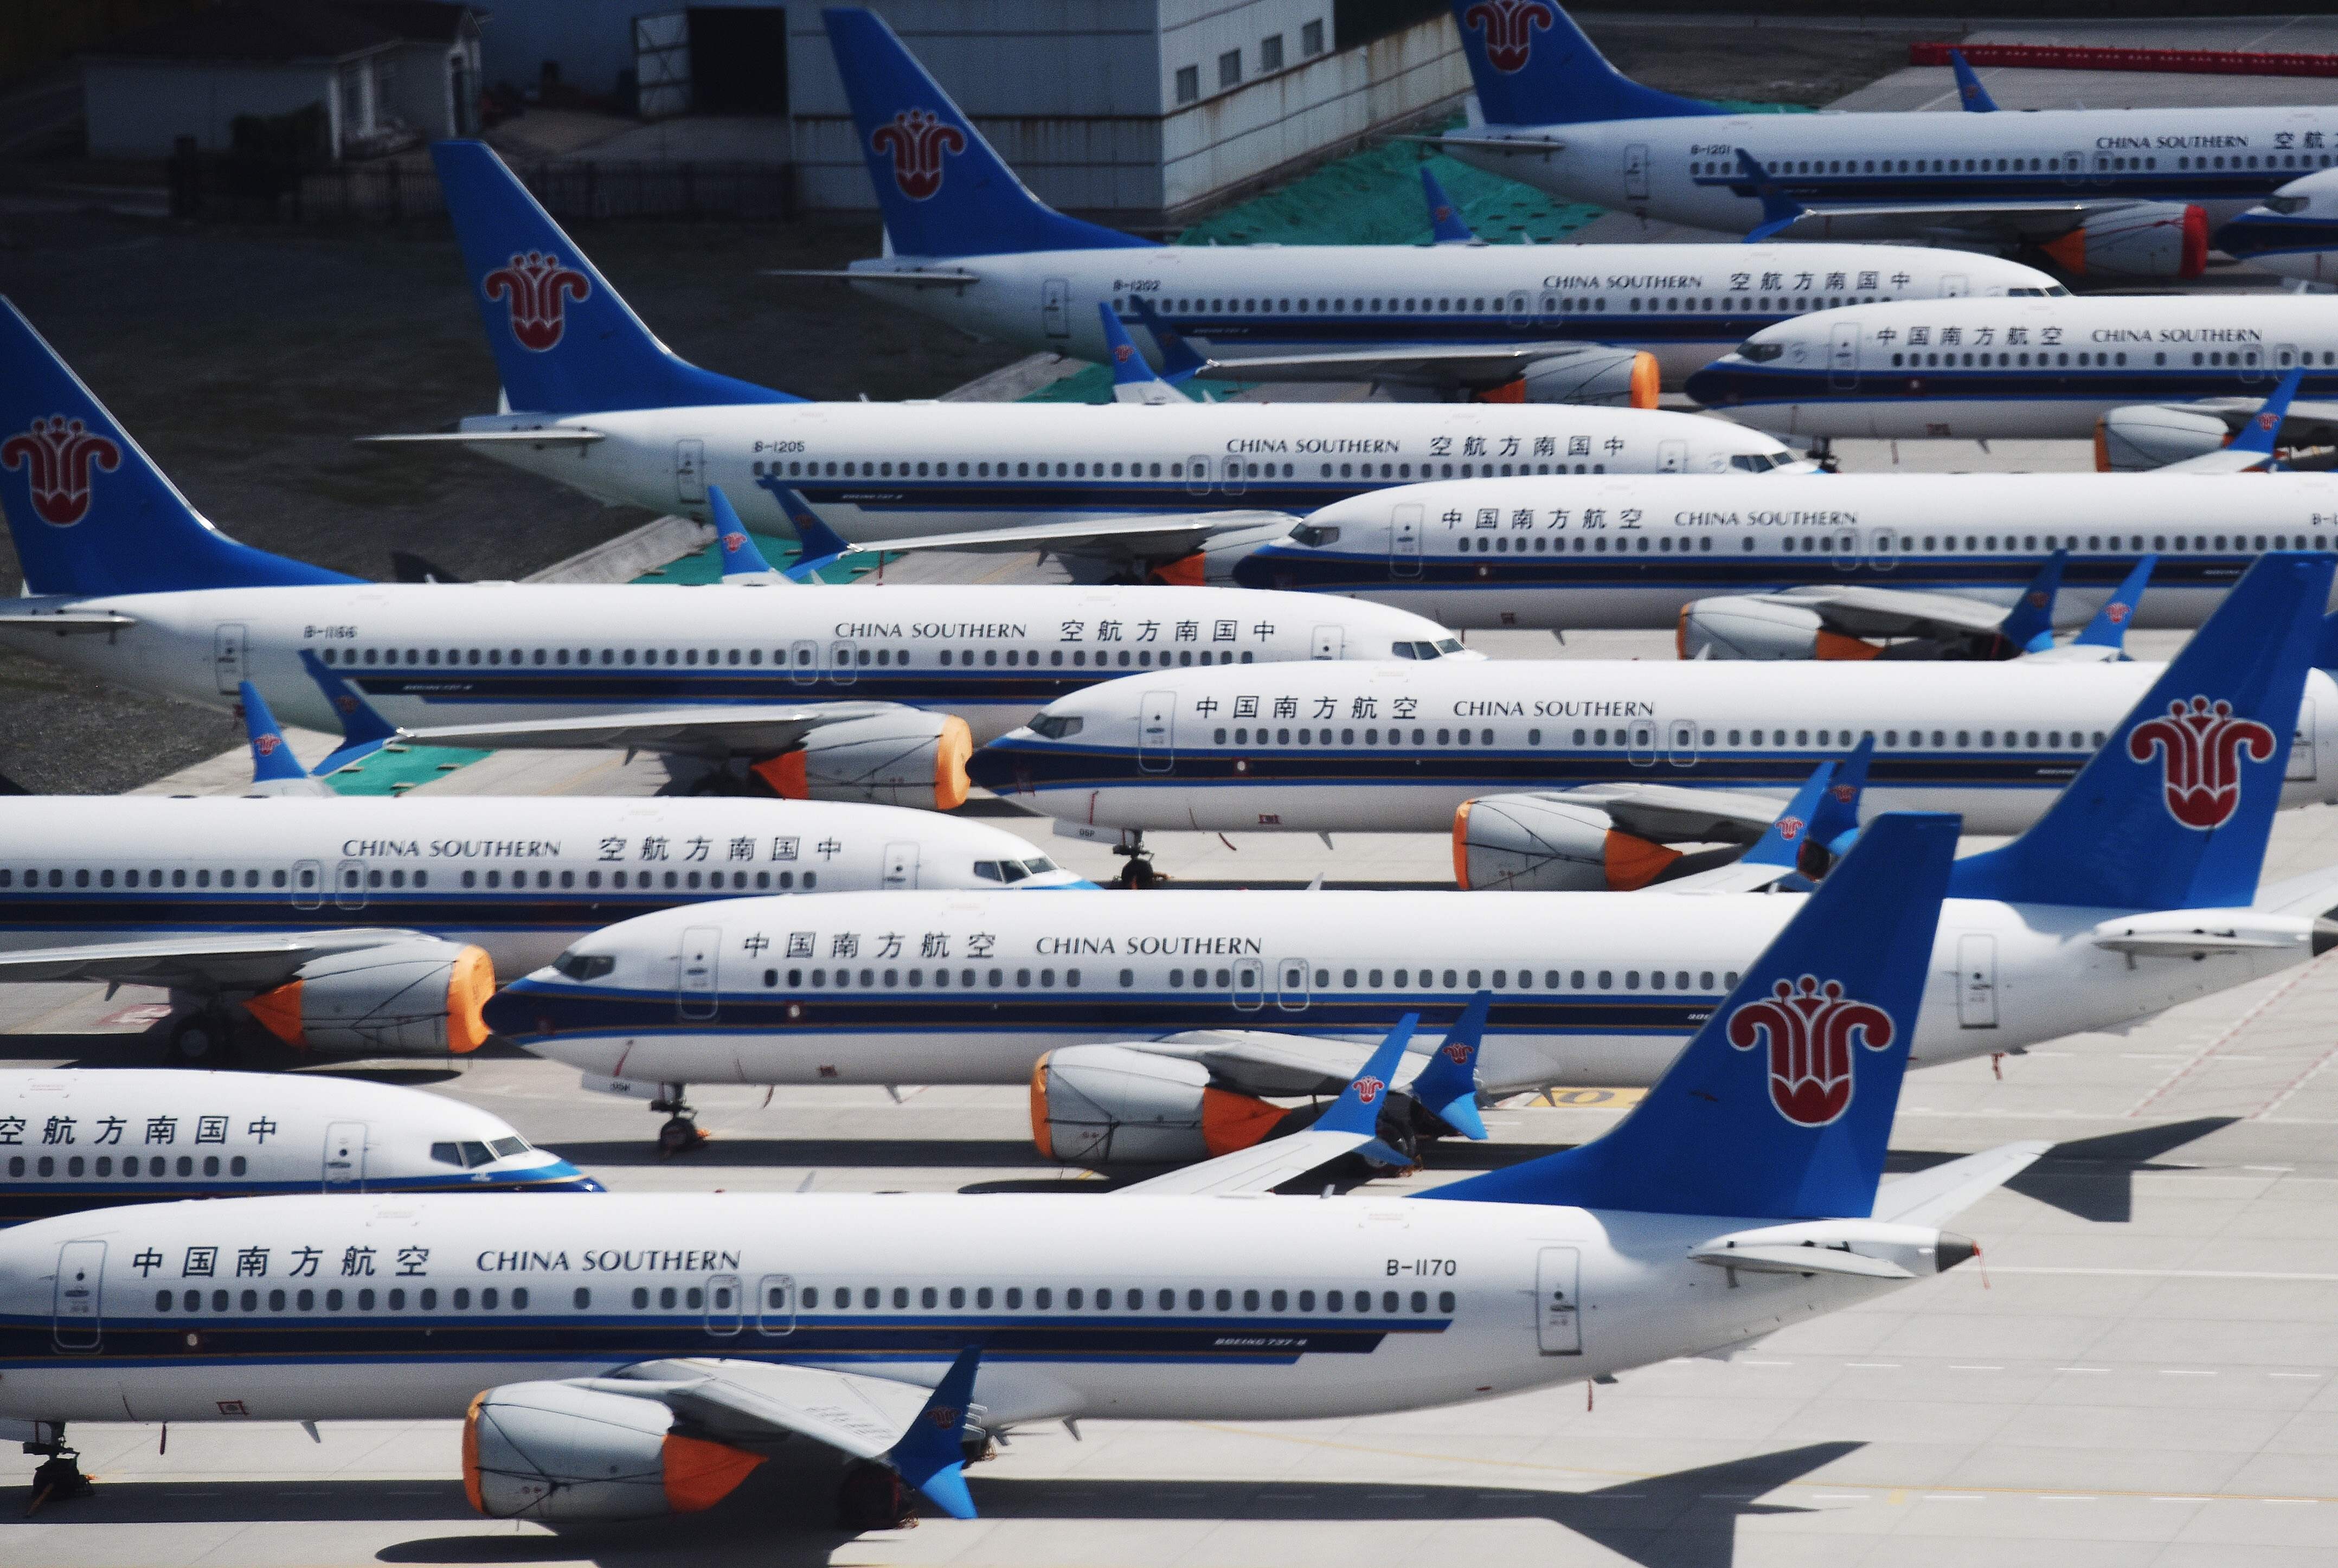 China Southern Airlines’ Boeing 737 MAX aircraft grounded at the Urumqi airport in Xinjiiang on June 6, 2019: Photo AFP